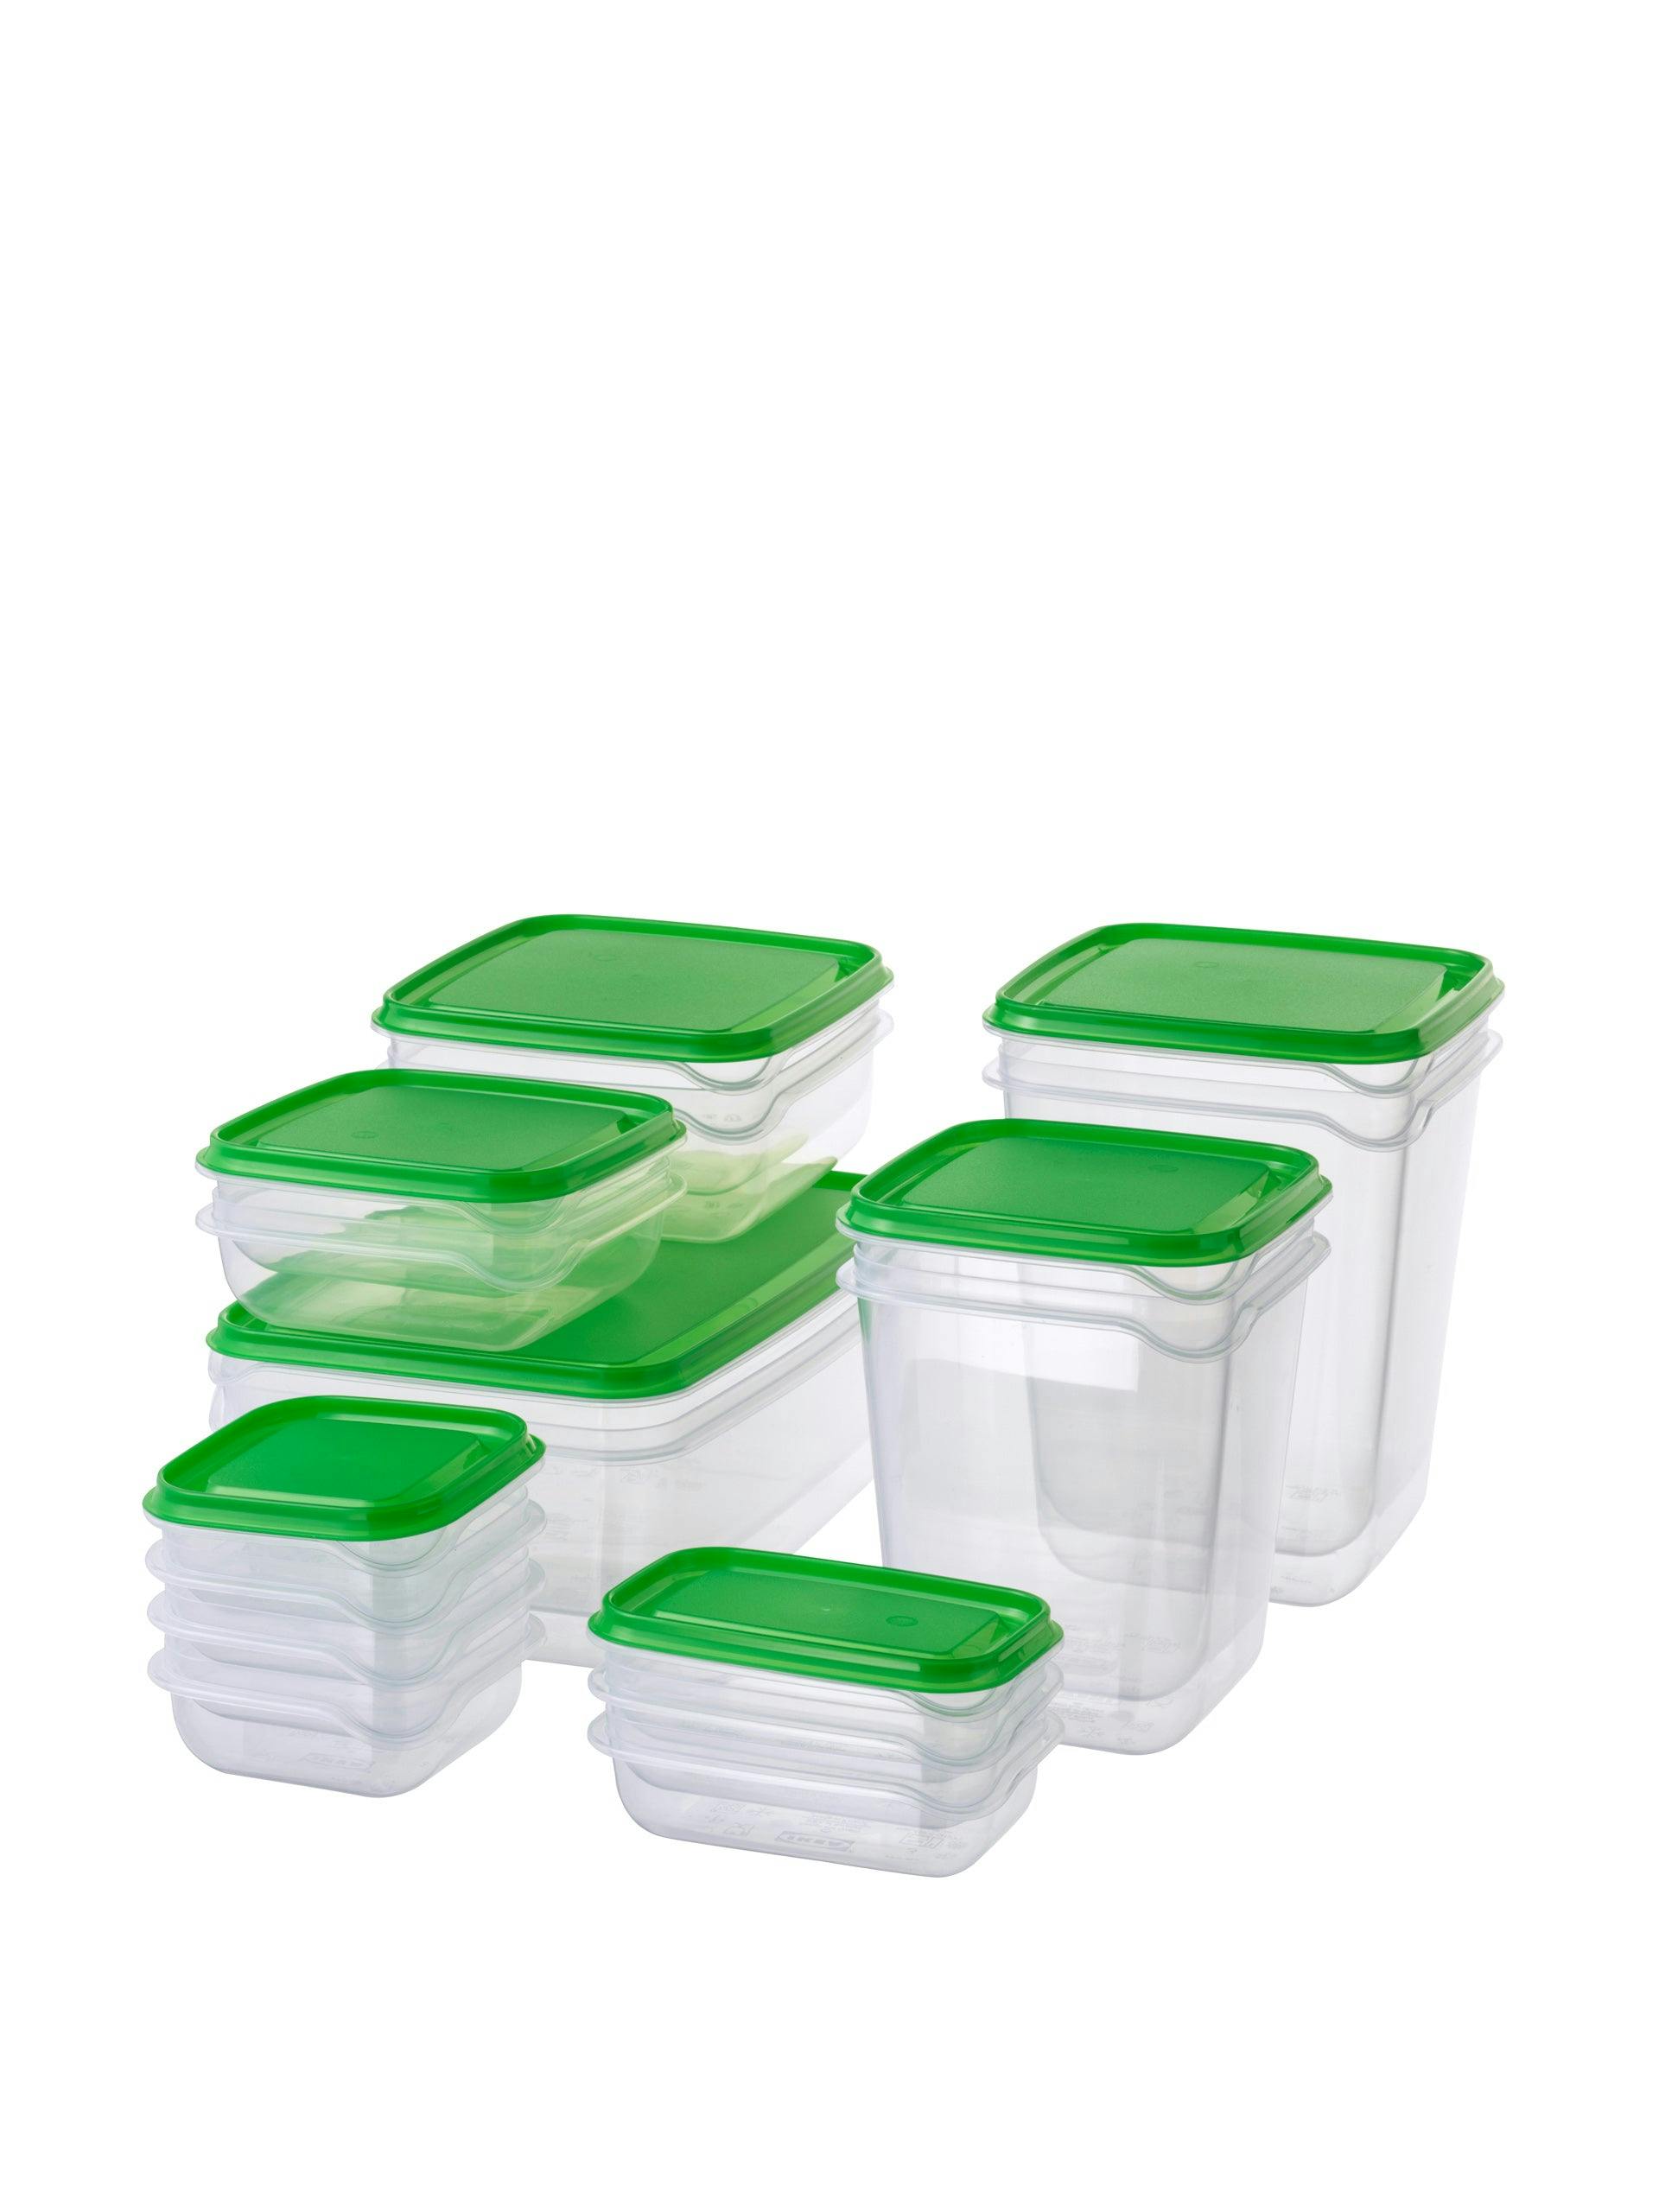 Food containers (set of 17)